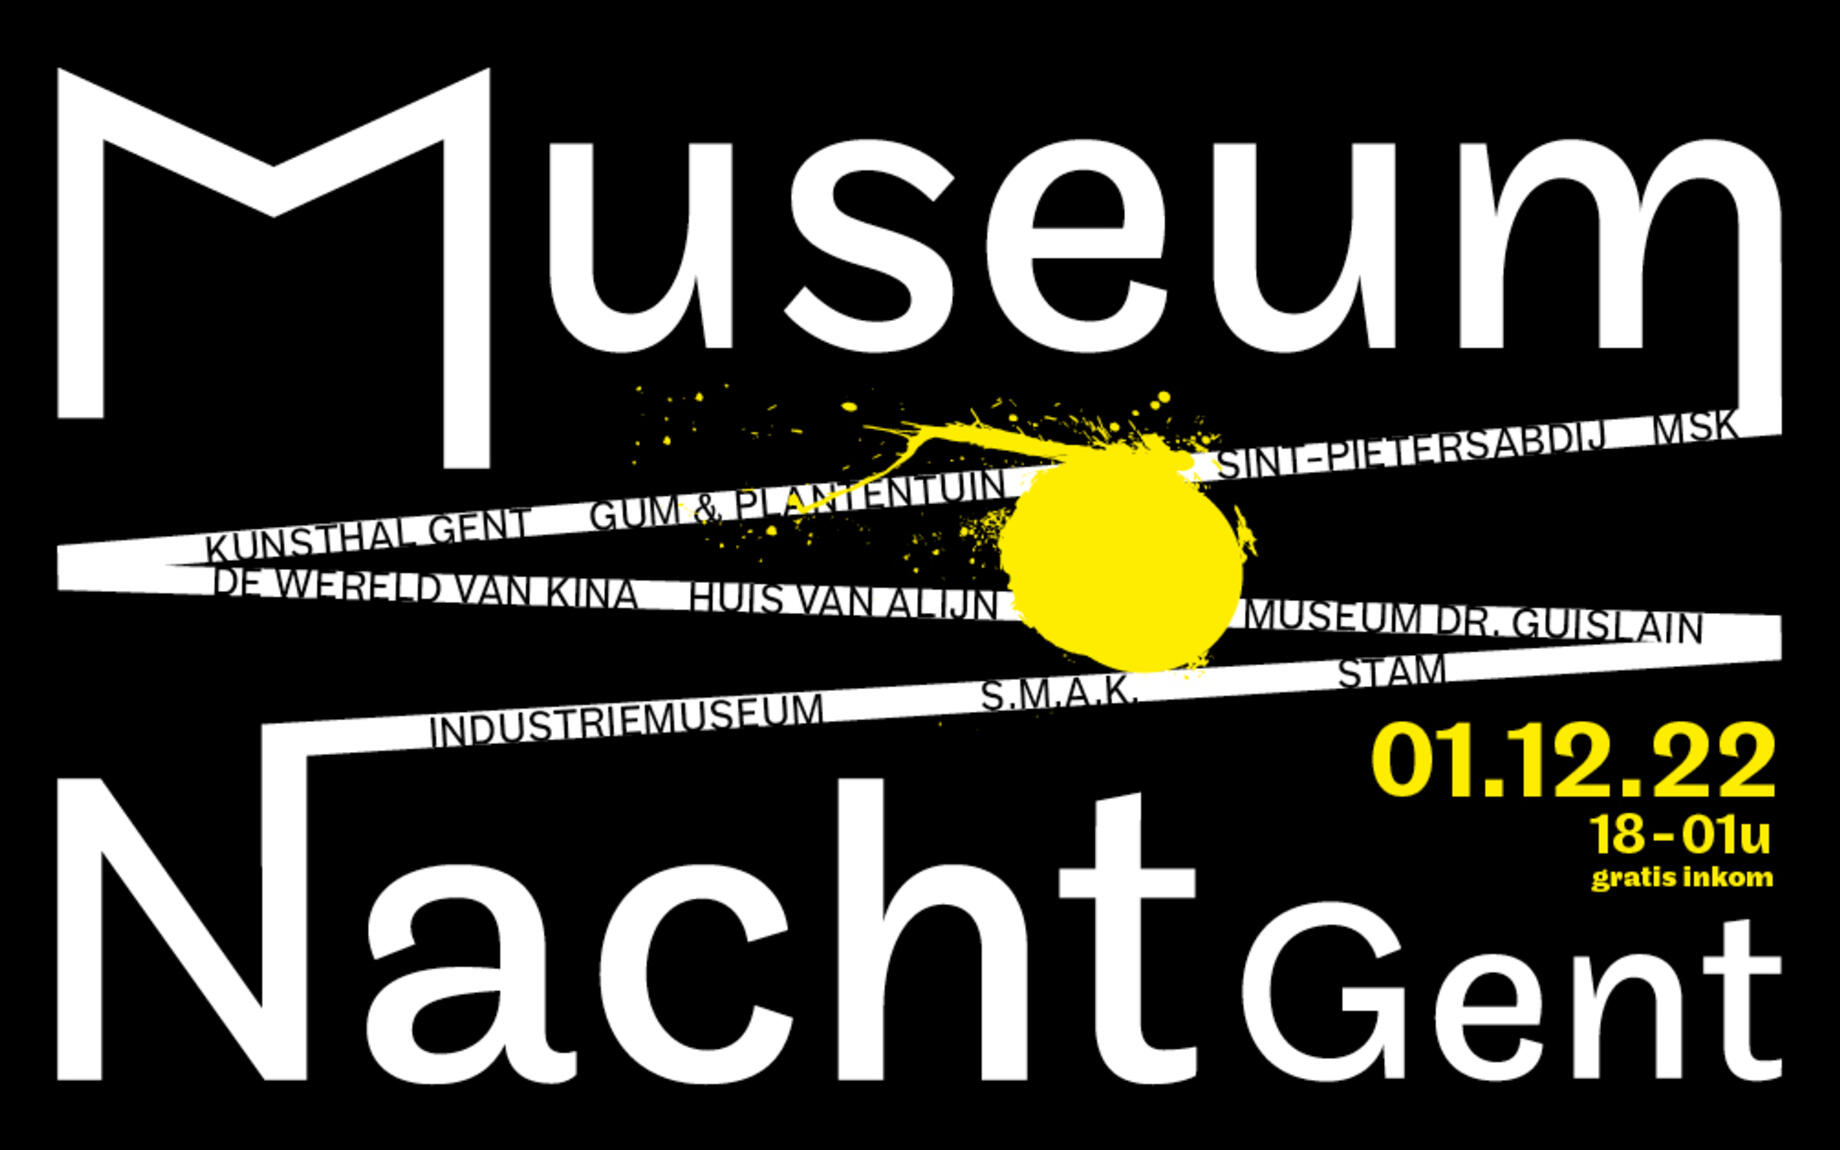 Museumnacht campagnebeeld